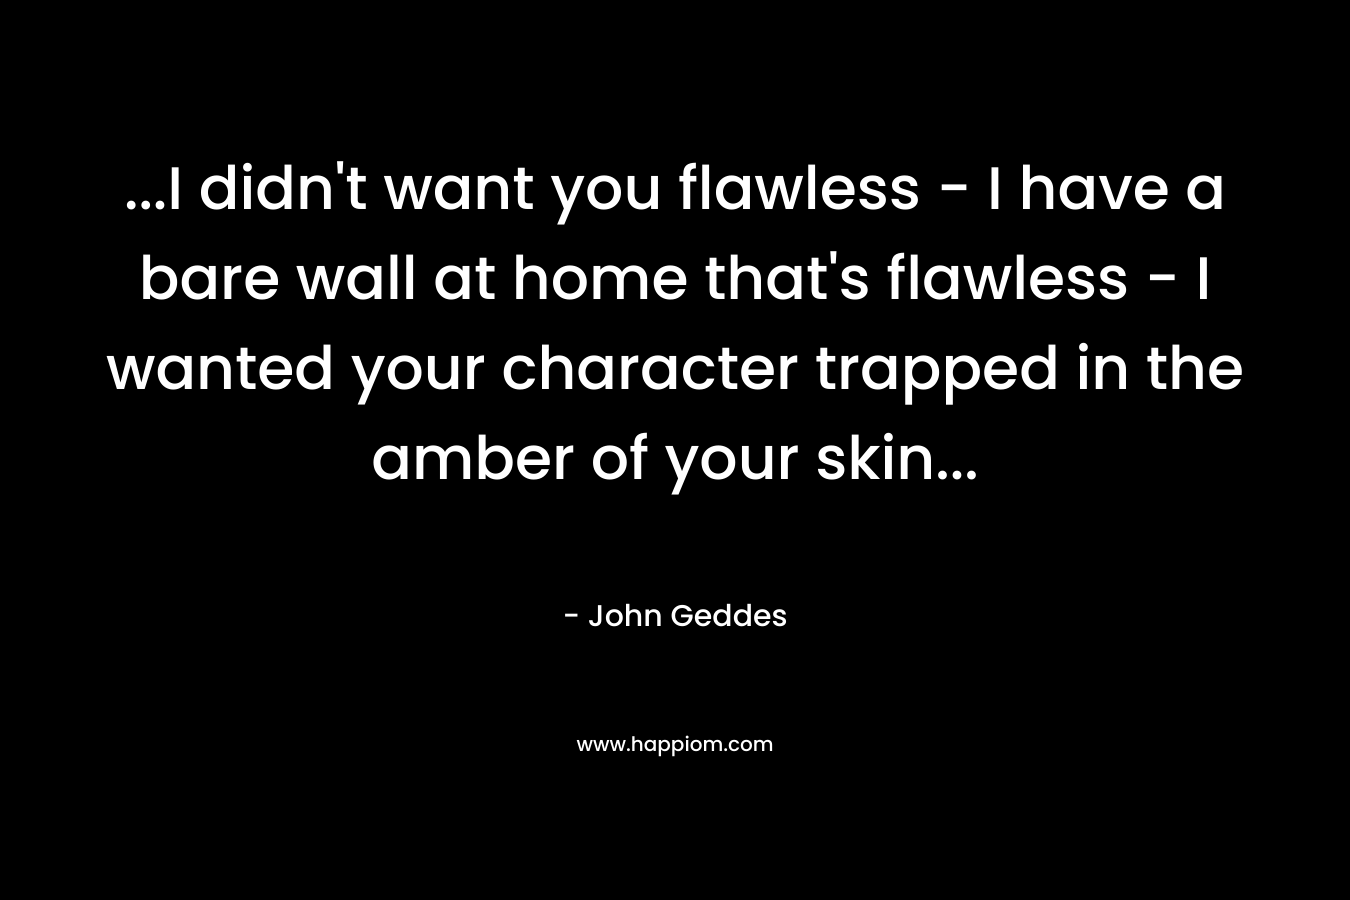 ...I didn't want you flawless - I have a bare wall at home that's flawless - I wanted your character trapped in the amber of your skin...